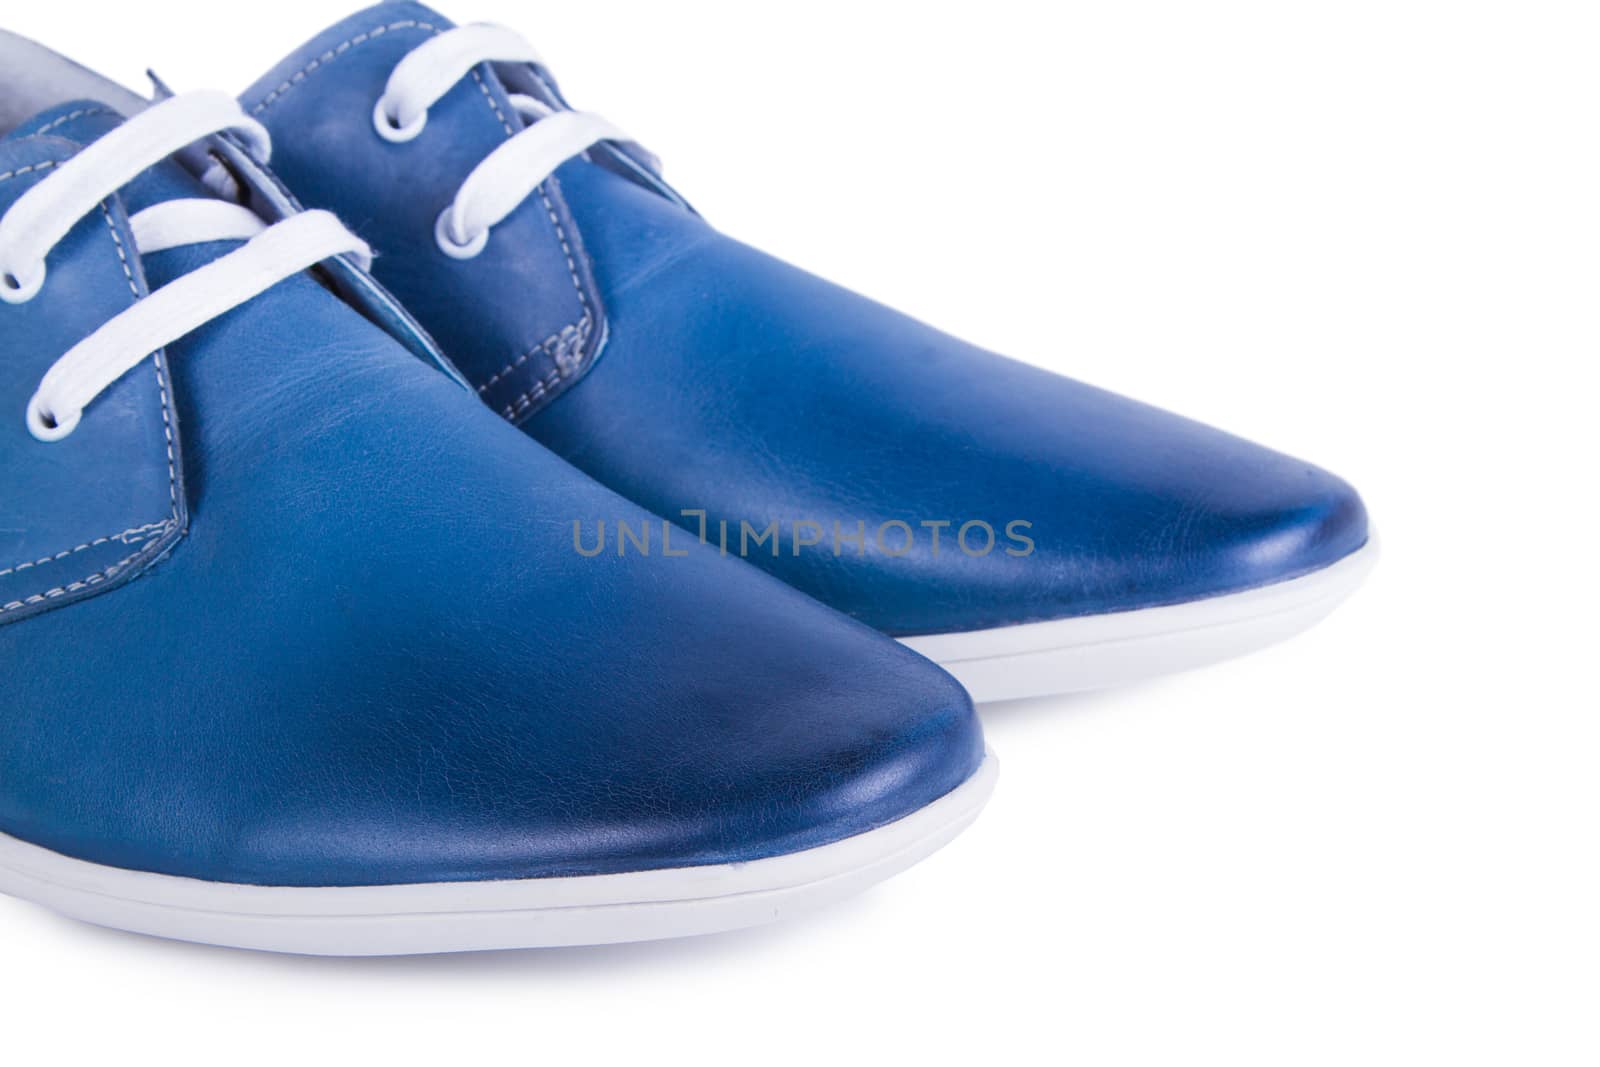 Pair of shoes for men by grigorenko